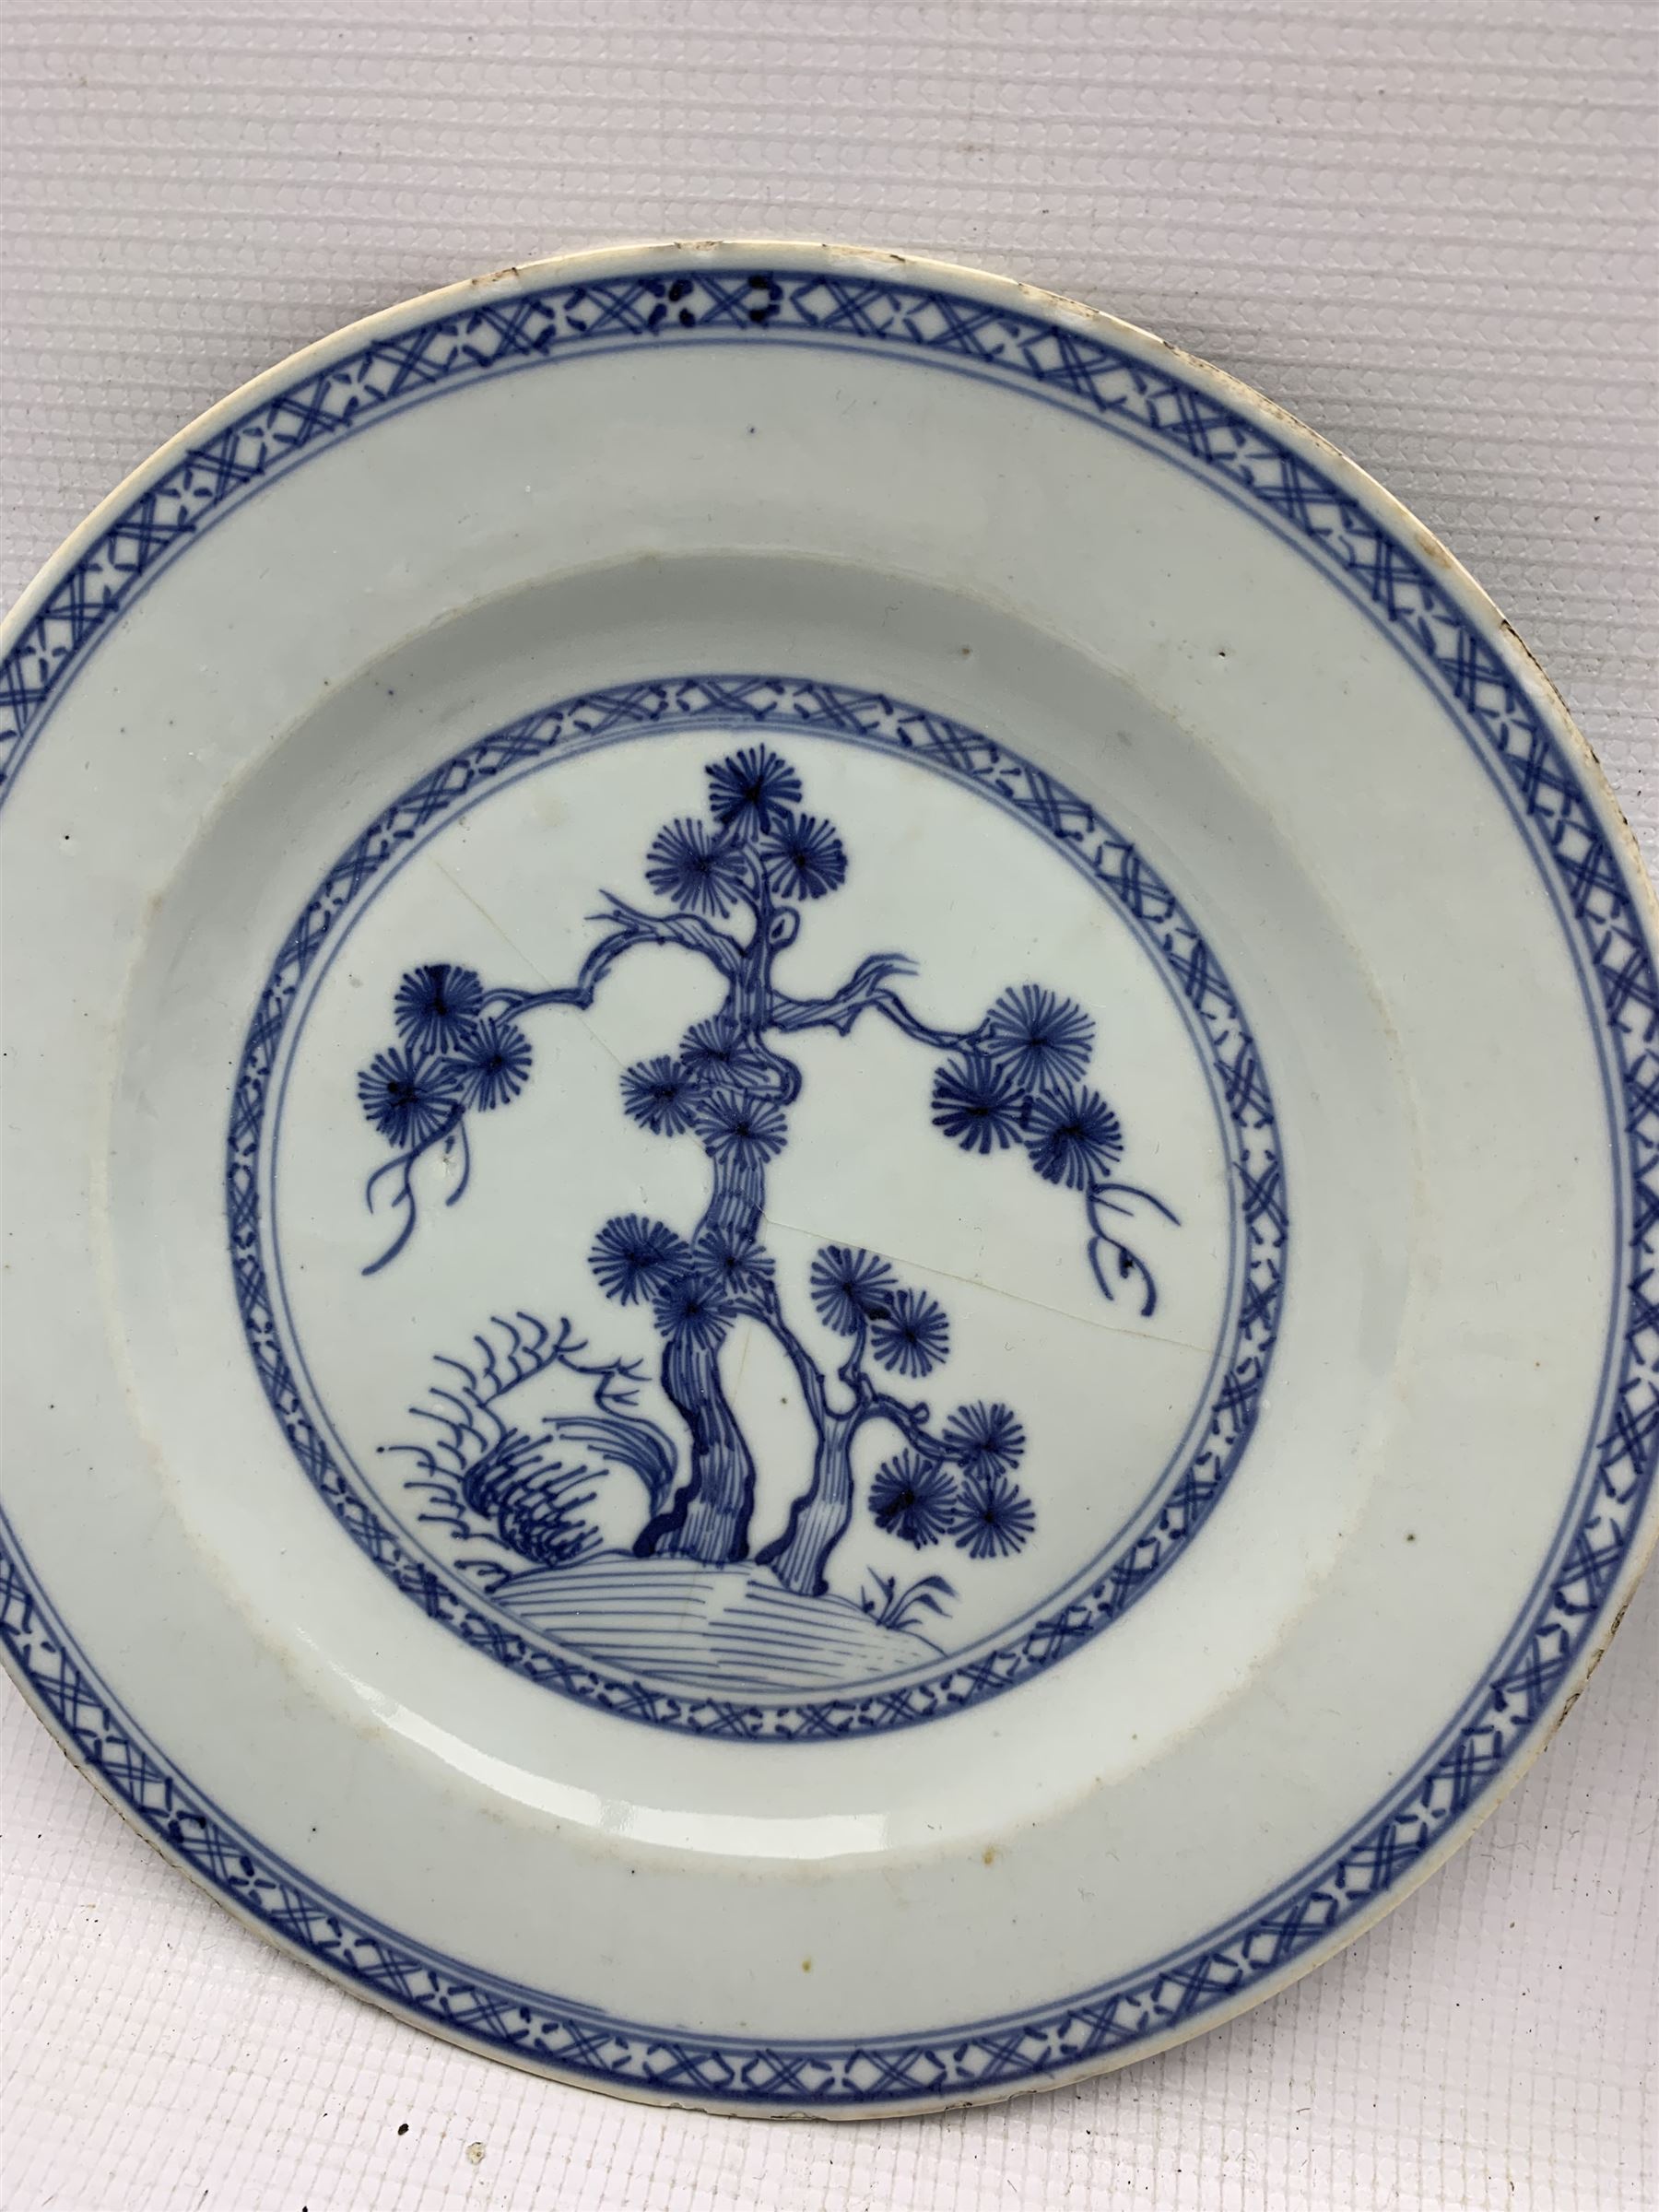 18th century Chinese Export porcelain blue and white charger - Image 6 of 11